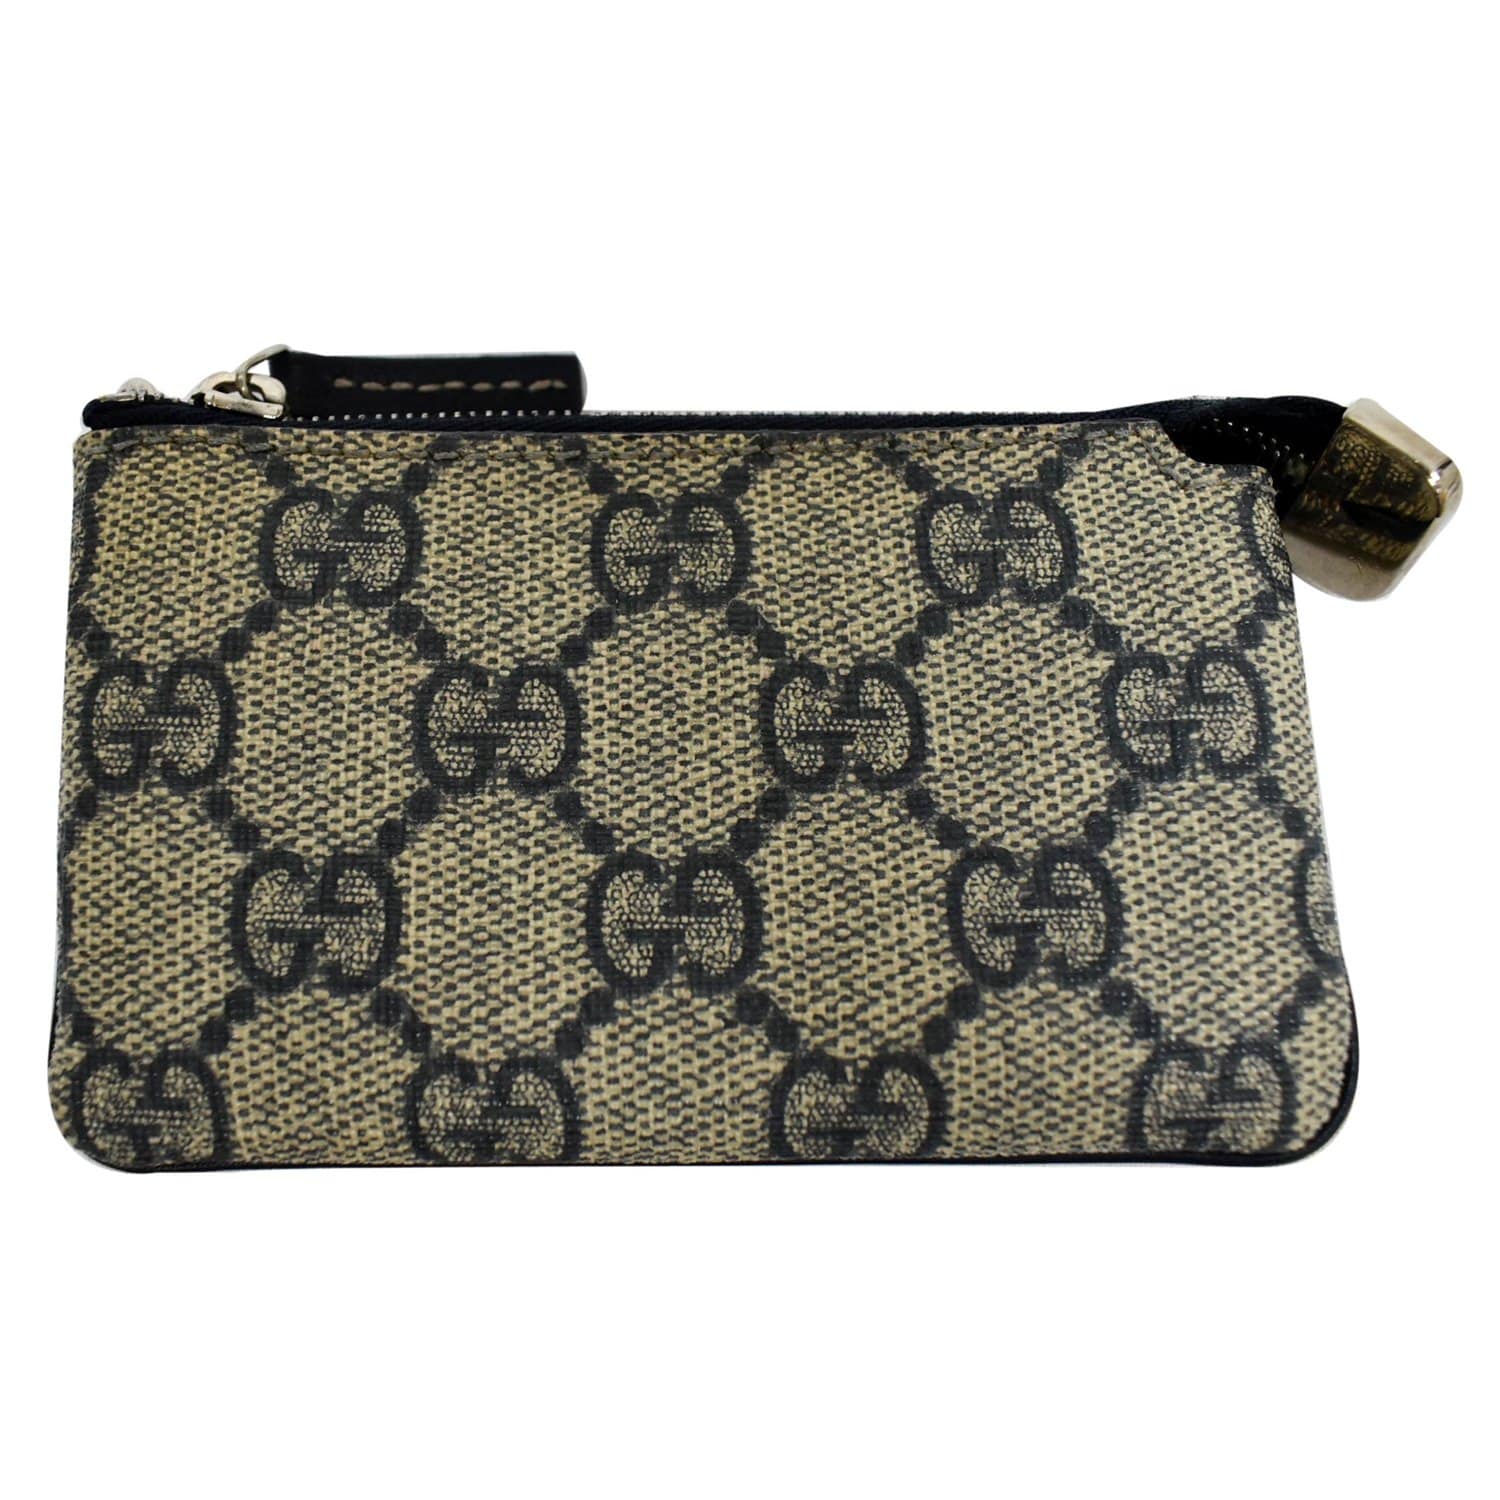 Ophidia GG key pouch in Beige Guccissima Leather